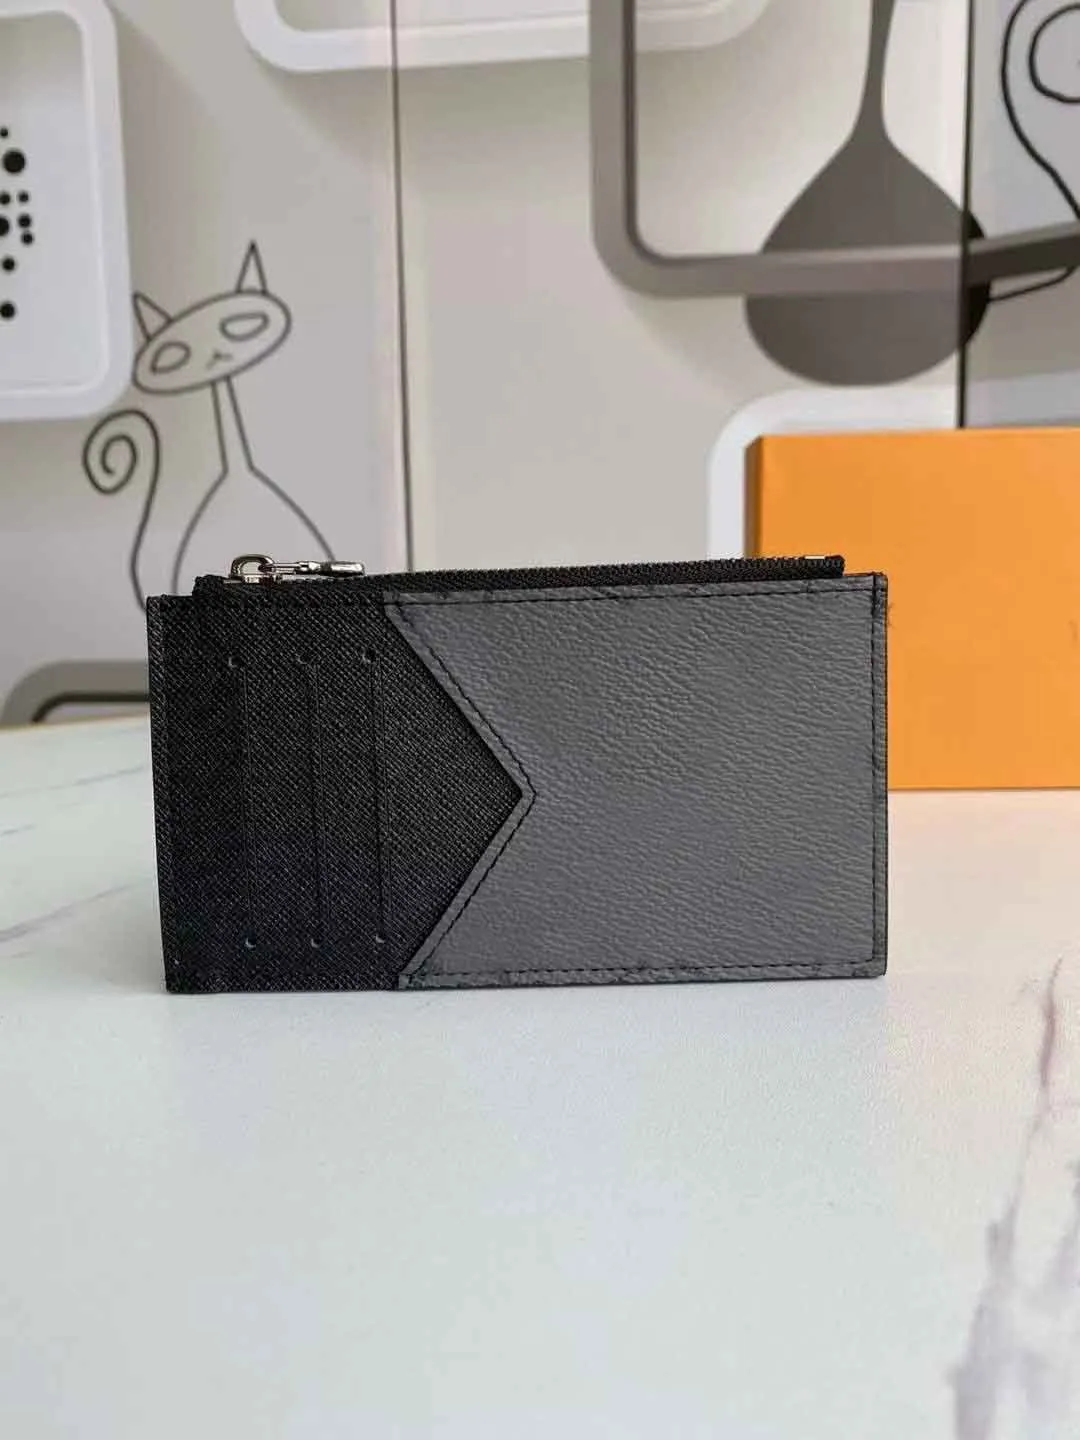 Very perfect Men Women Genuine Leather Slim Wallet short Multiple Cards Holder Clutch Purse Female Original Leather Solid Wallet 67630 64038